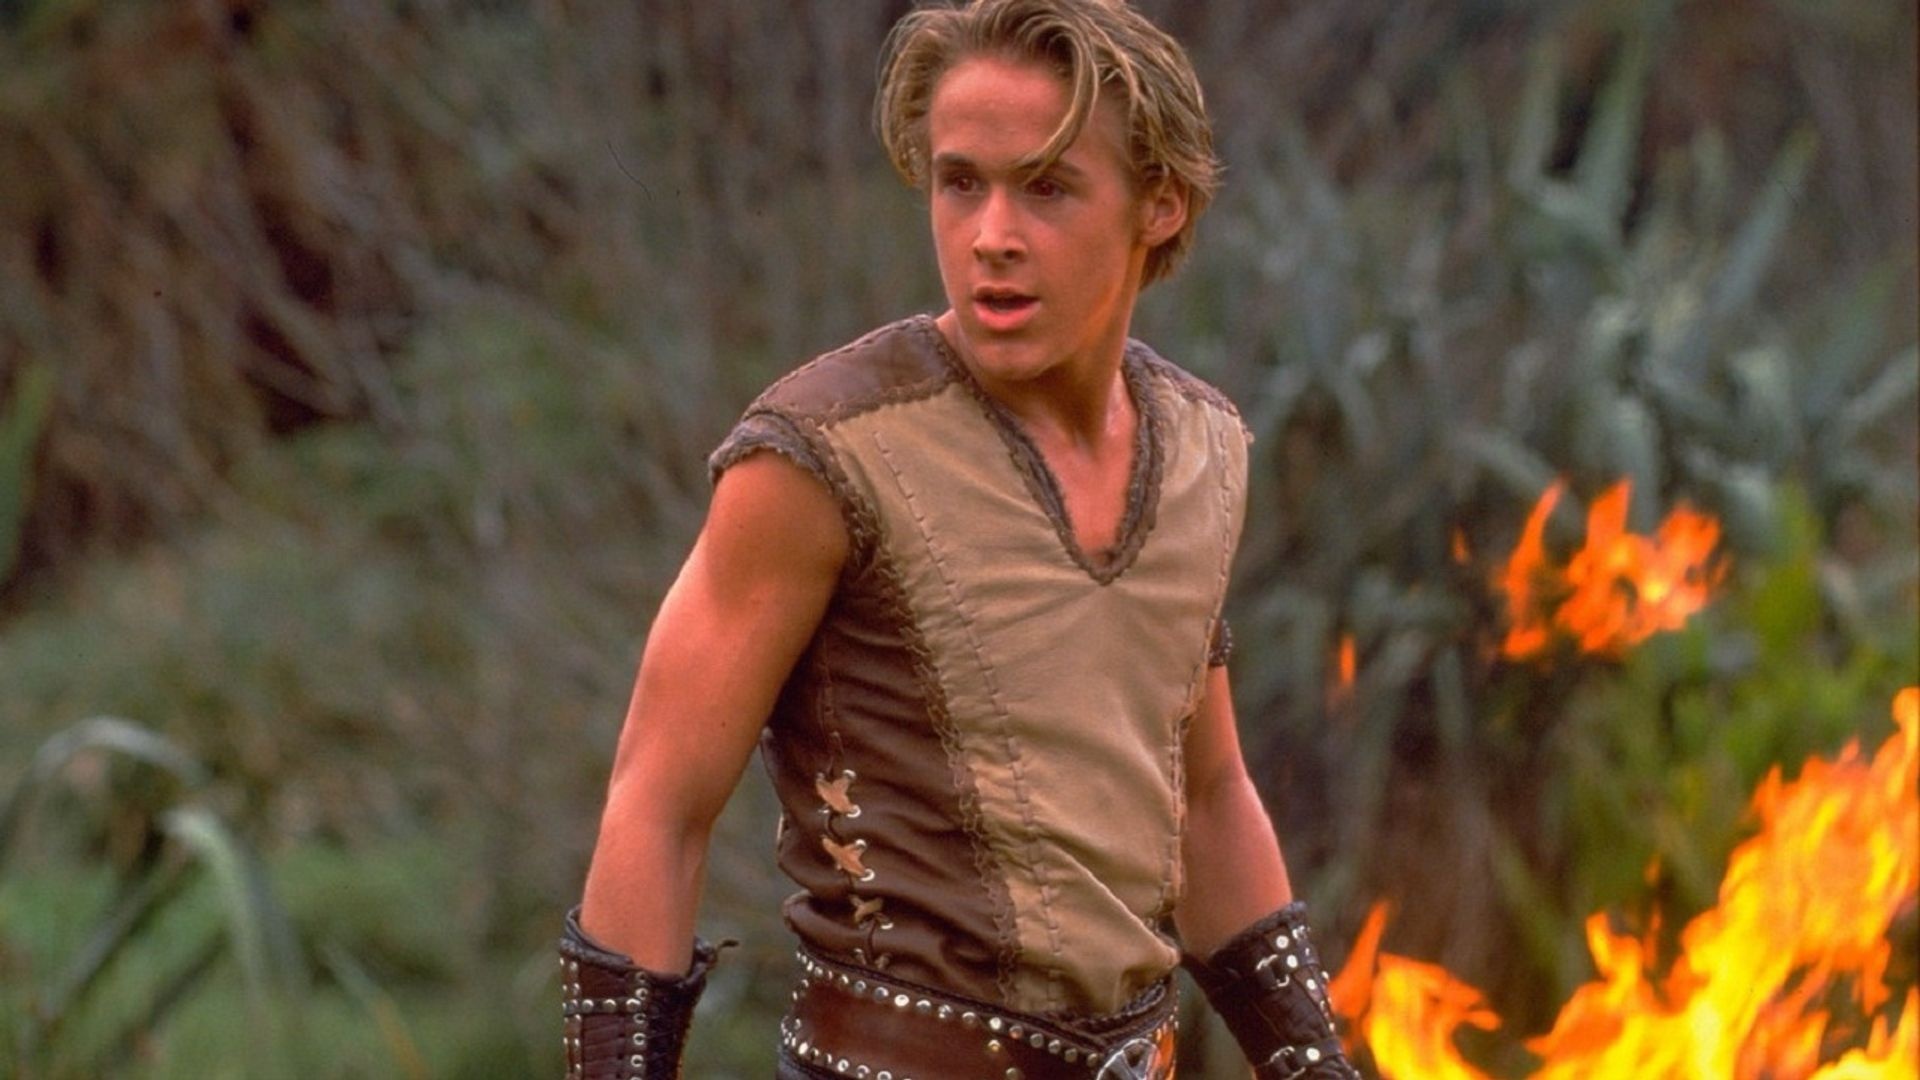 Hercules: The Legendary Journeys (TV Series): Ryan Gosling as the leading character in the Young Hercules spin-off. 1920x1080 Full HD Background.